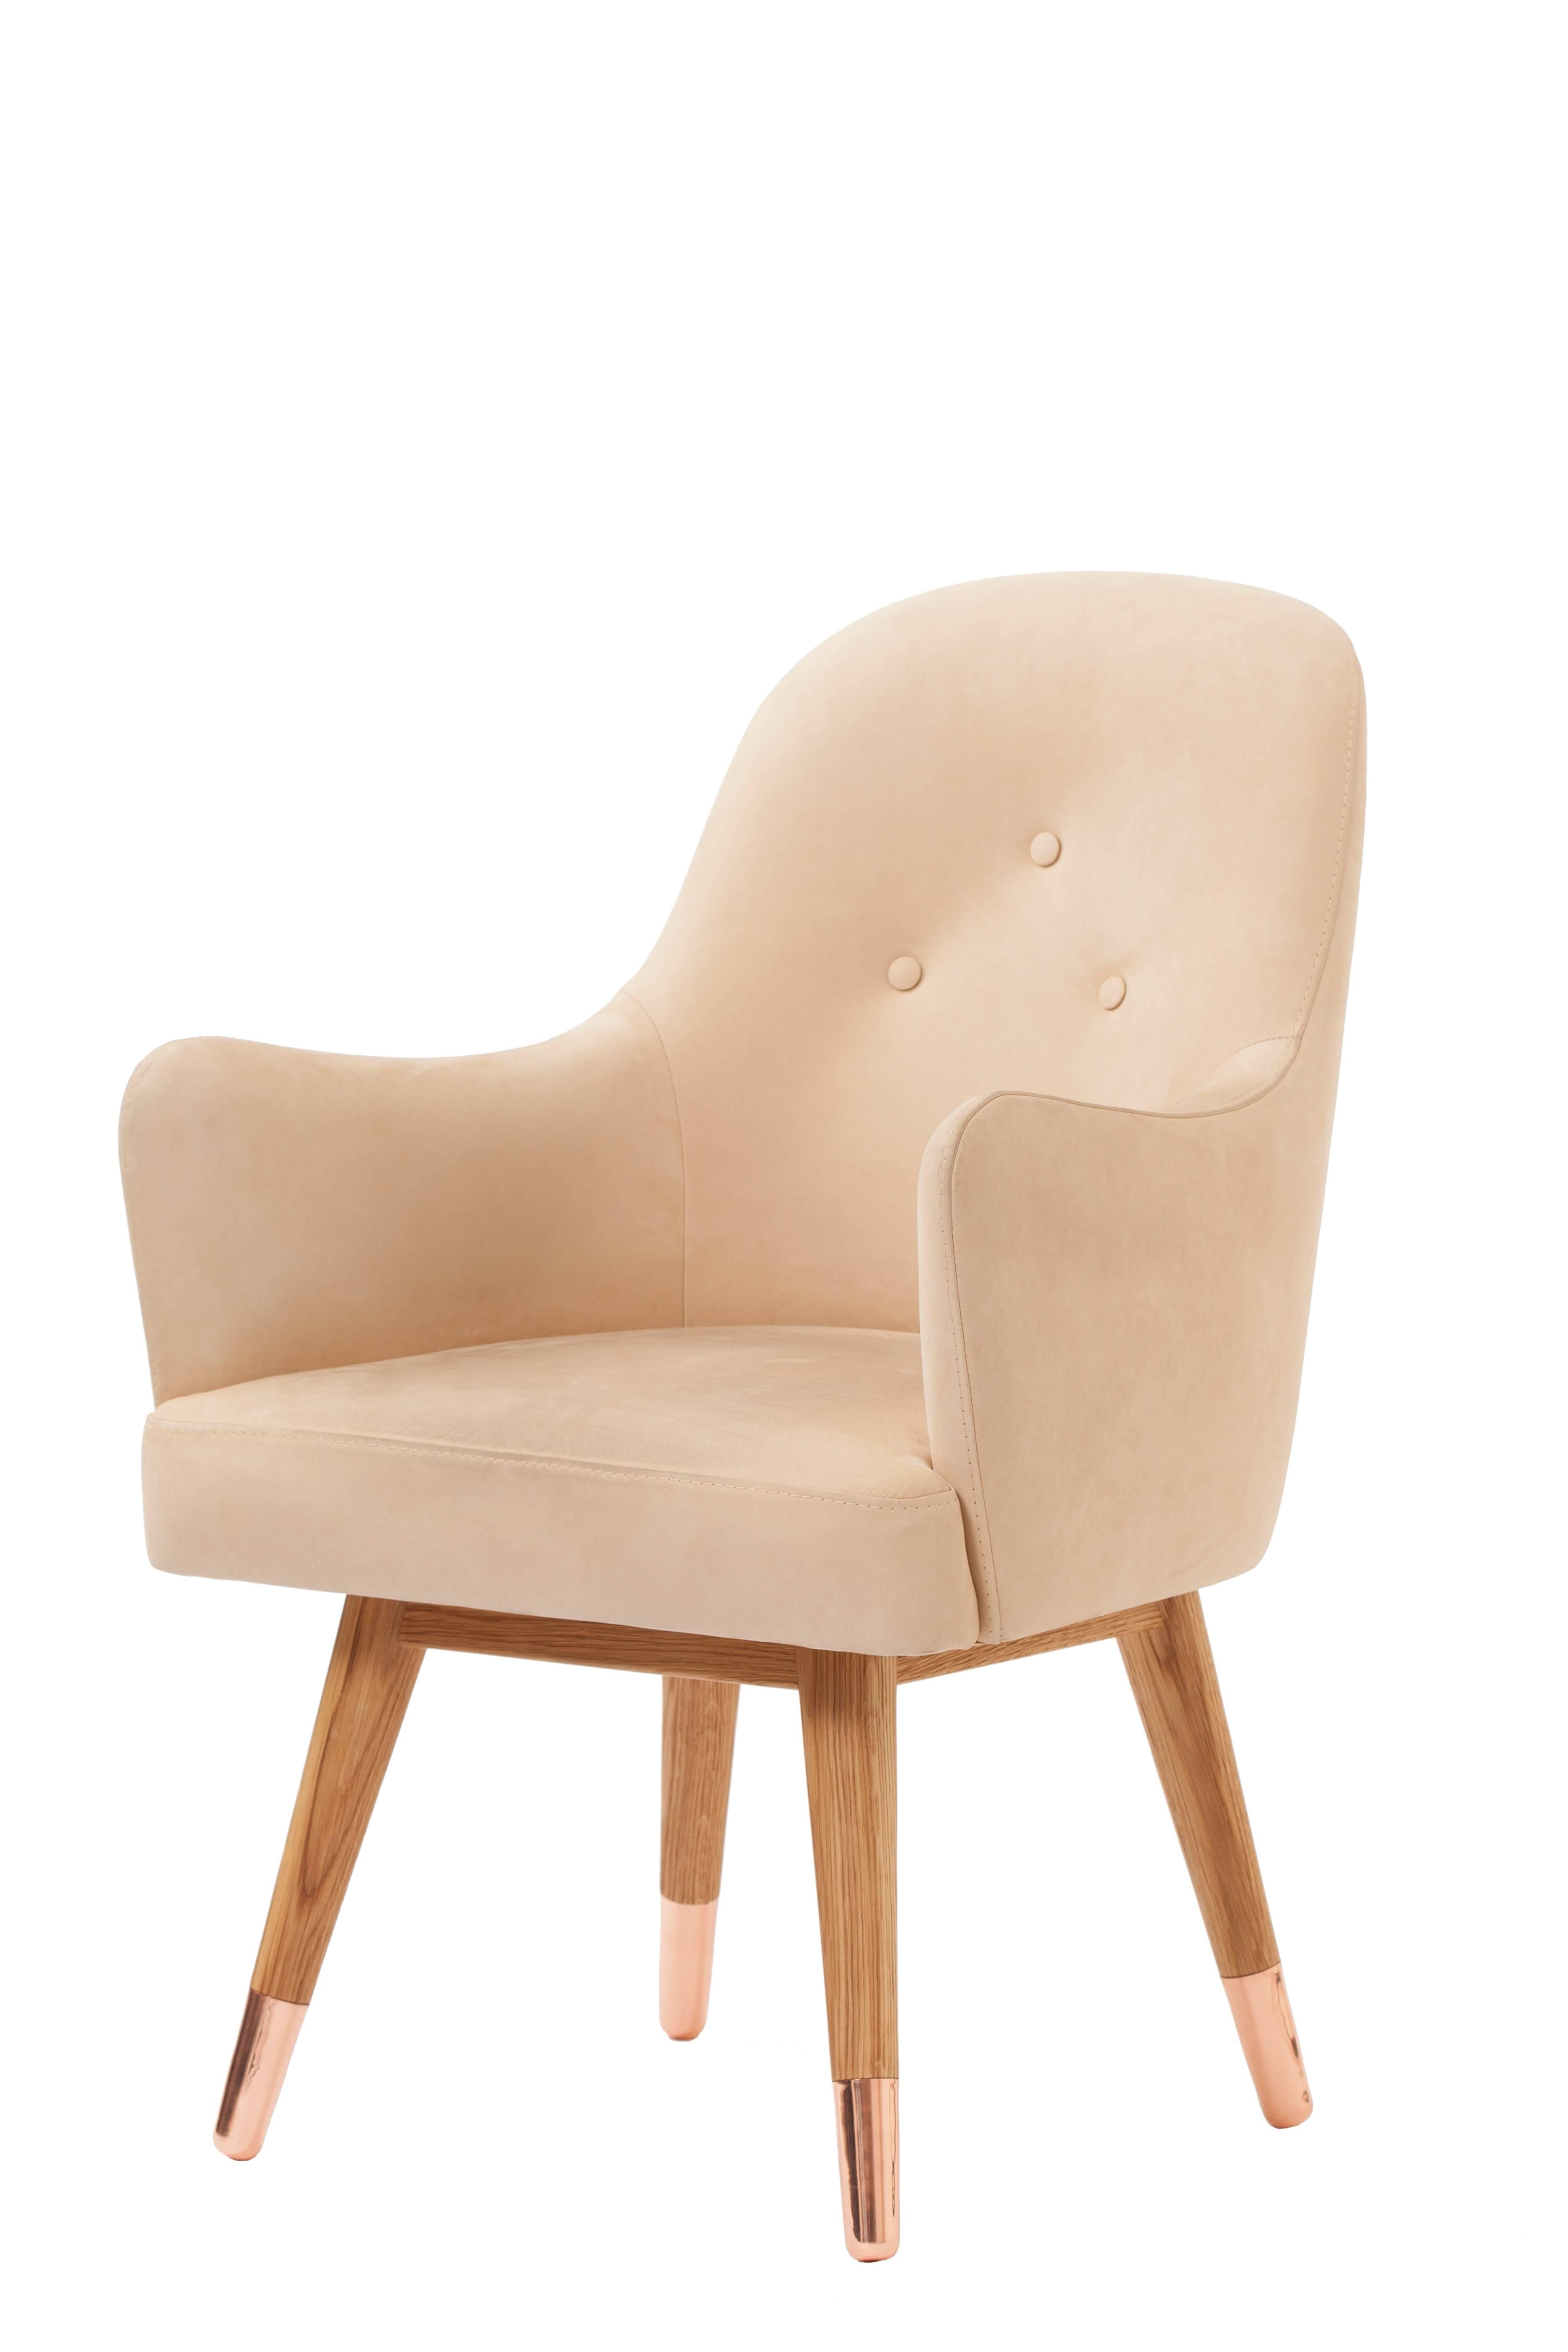 Dandy chair by Istanbul-based designer Merve Kahraman is designed to bring a fresh, modern, natural style to its environment. Comfort and style are keys to this contemporary design which would grace any modern setting. 

Thanks to its curved